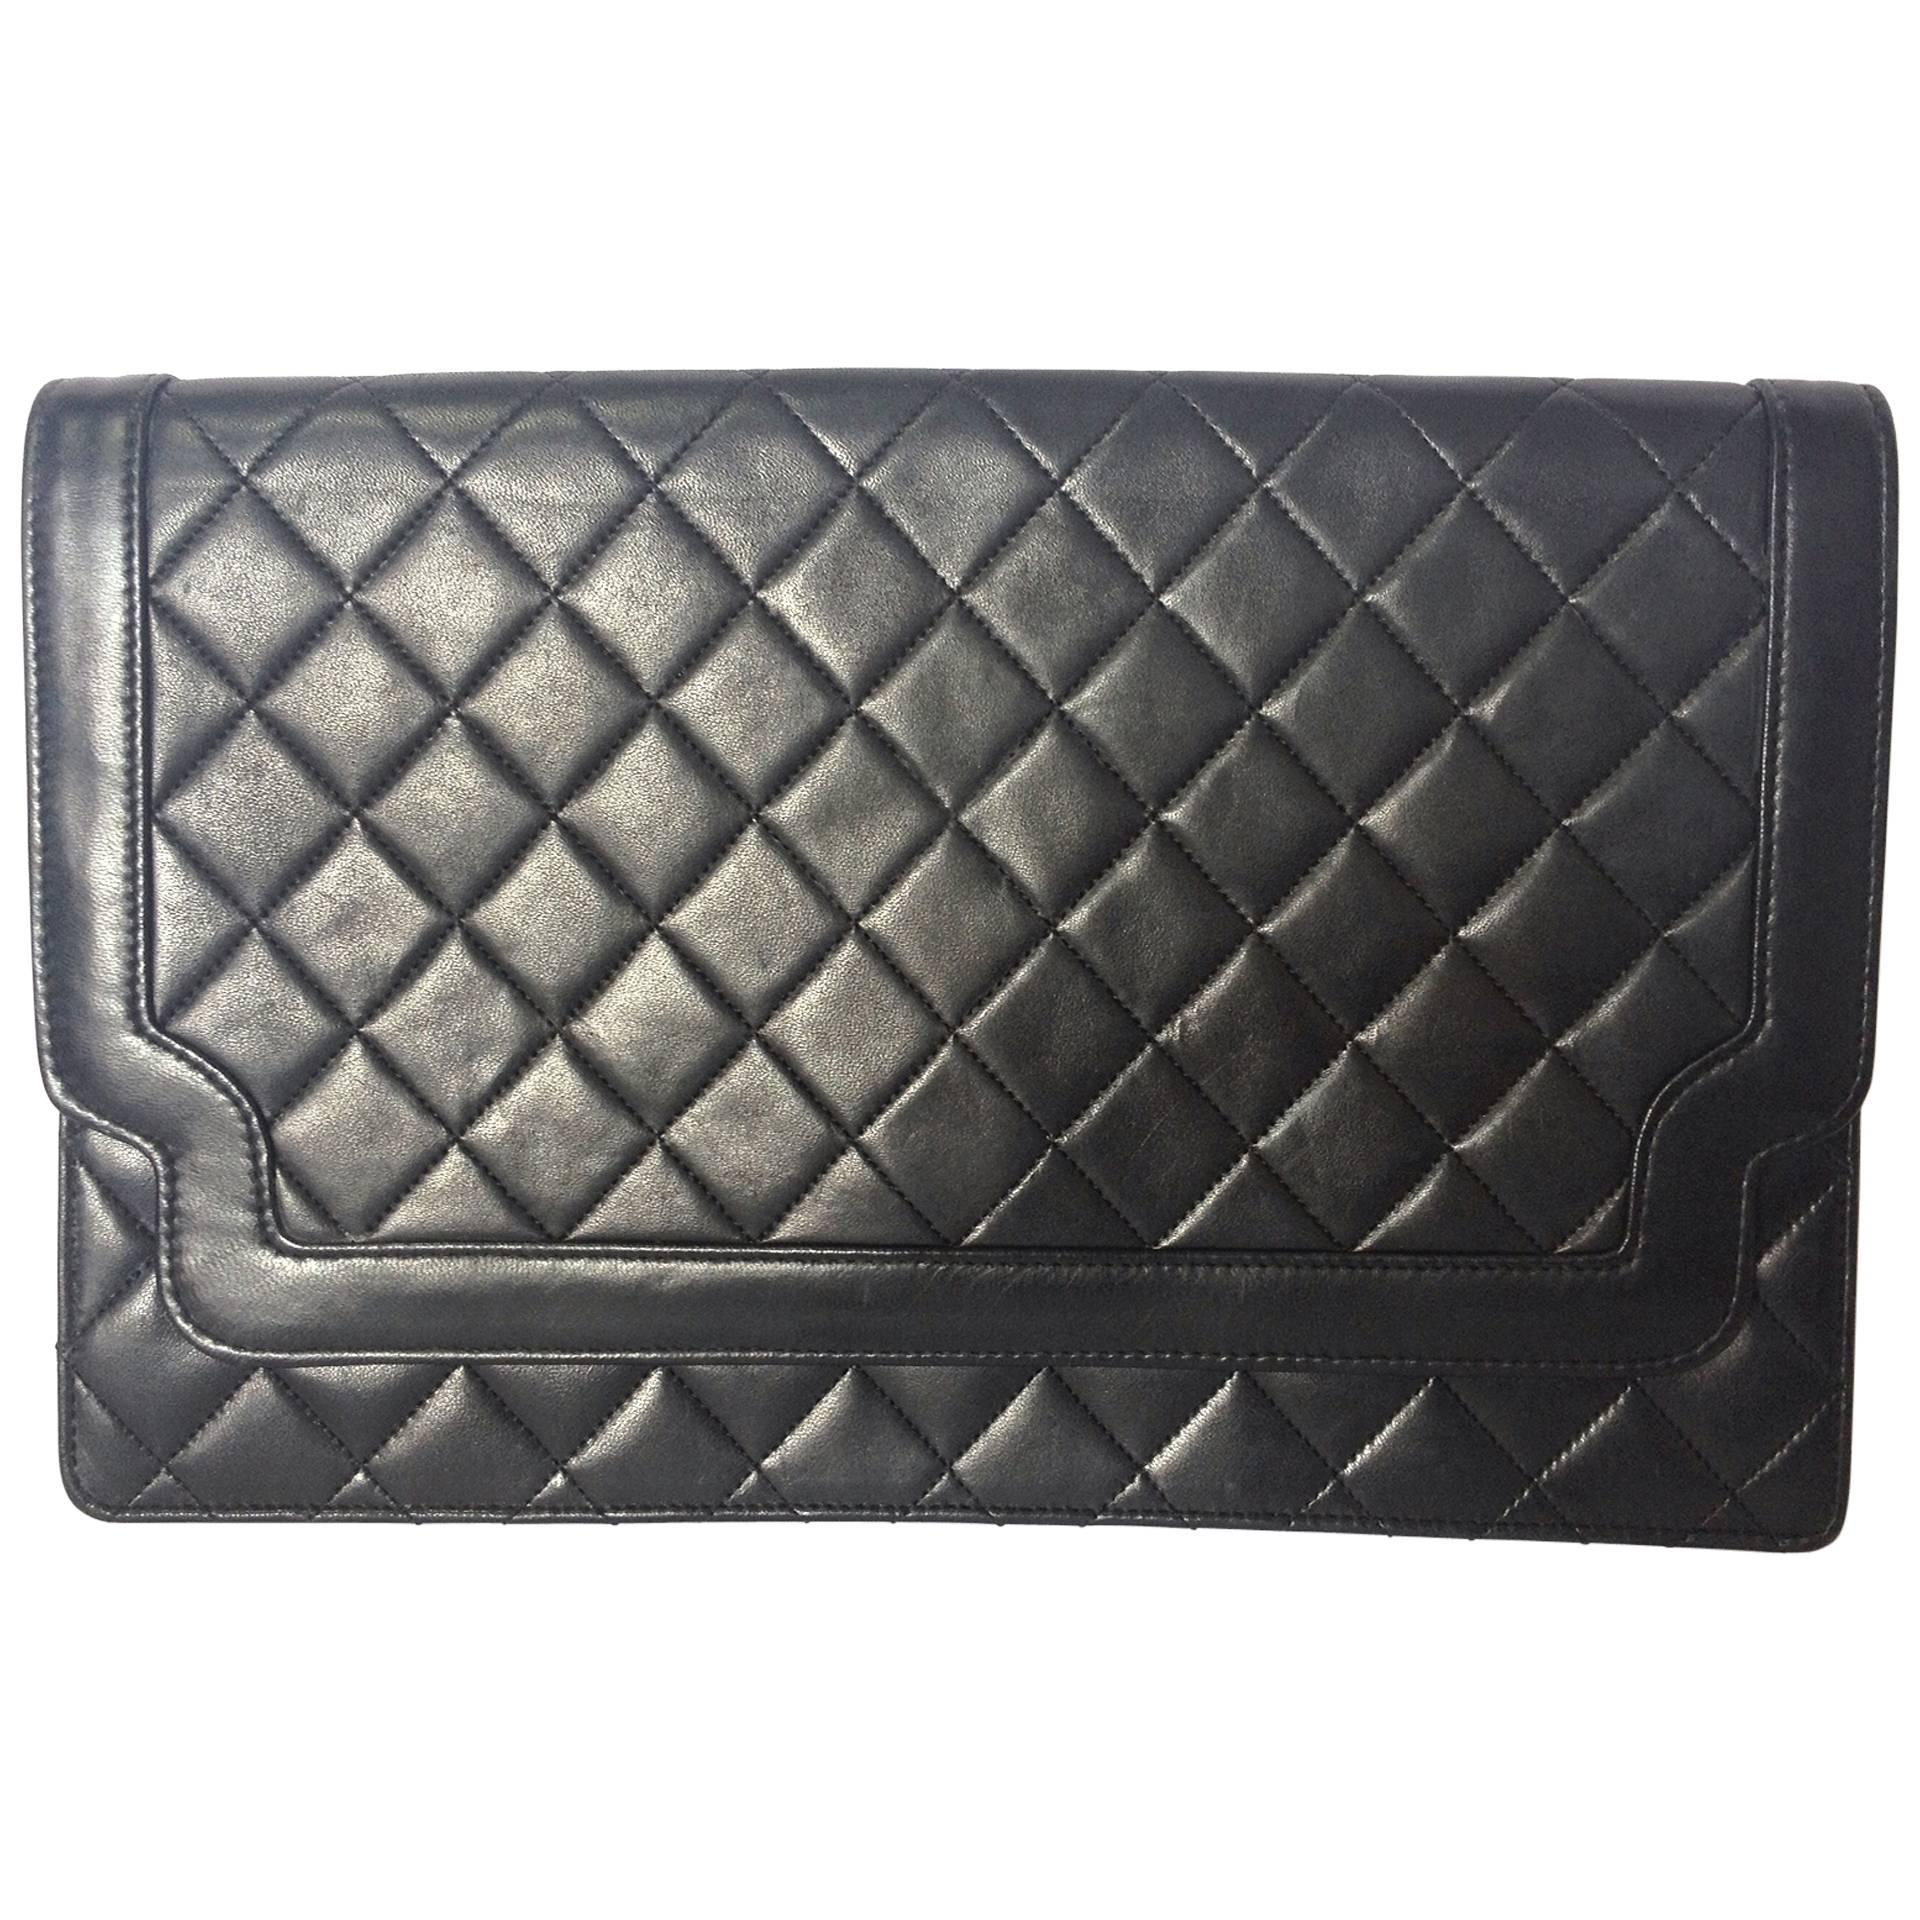 Vintage CHANEL classic black quilted lambskin document clutch purse. Classic bag